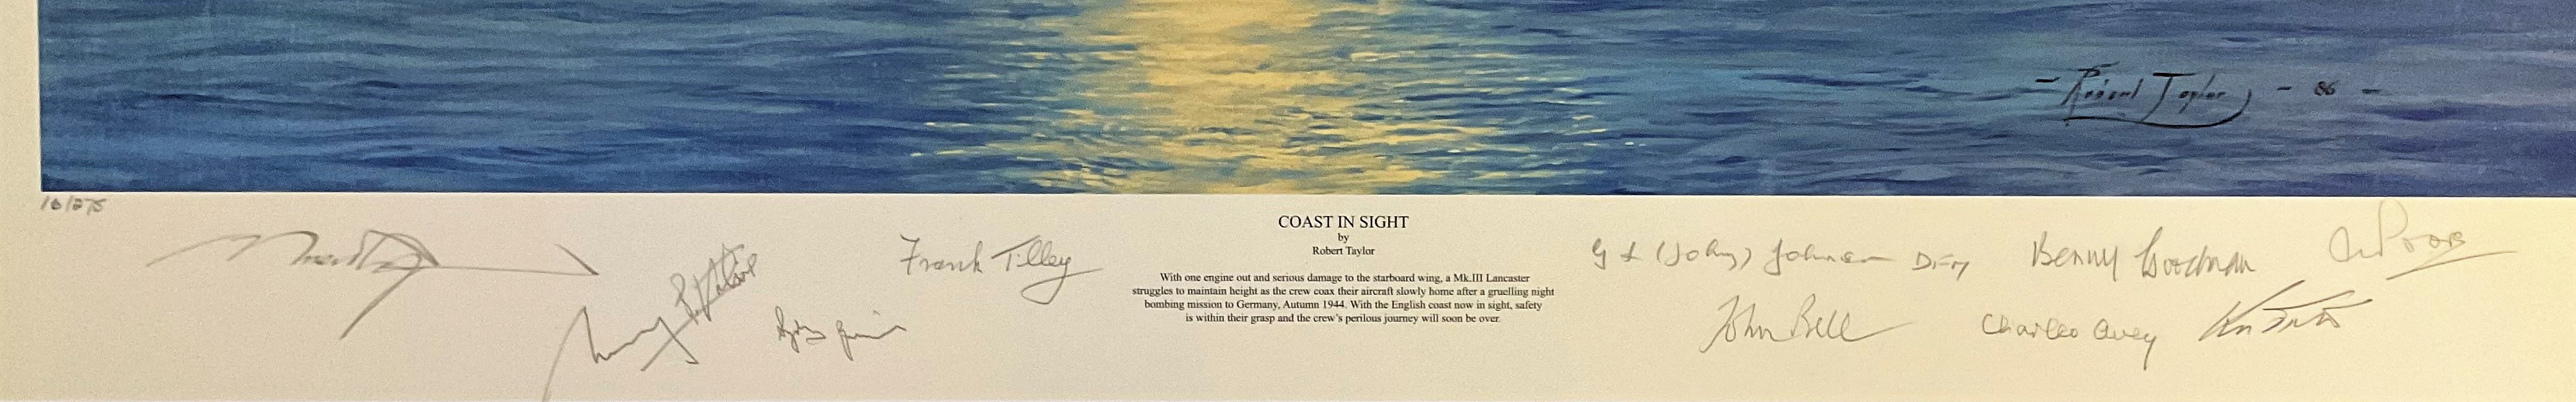 Robert Taylor Multi Signed Colour 32x23 Limited Edition 10/275 Print Titled 'Coast In Sight'. Signed - Image 2 of 2